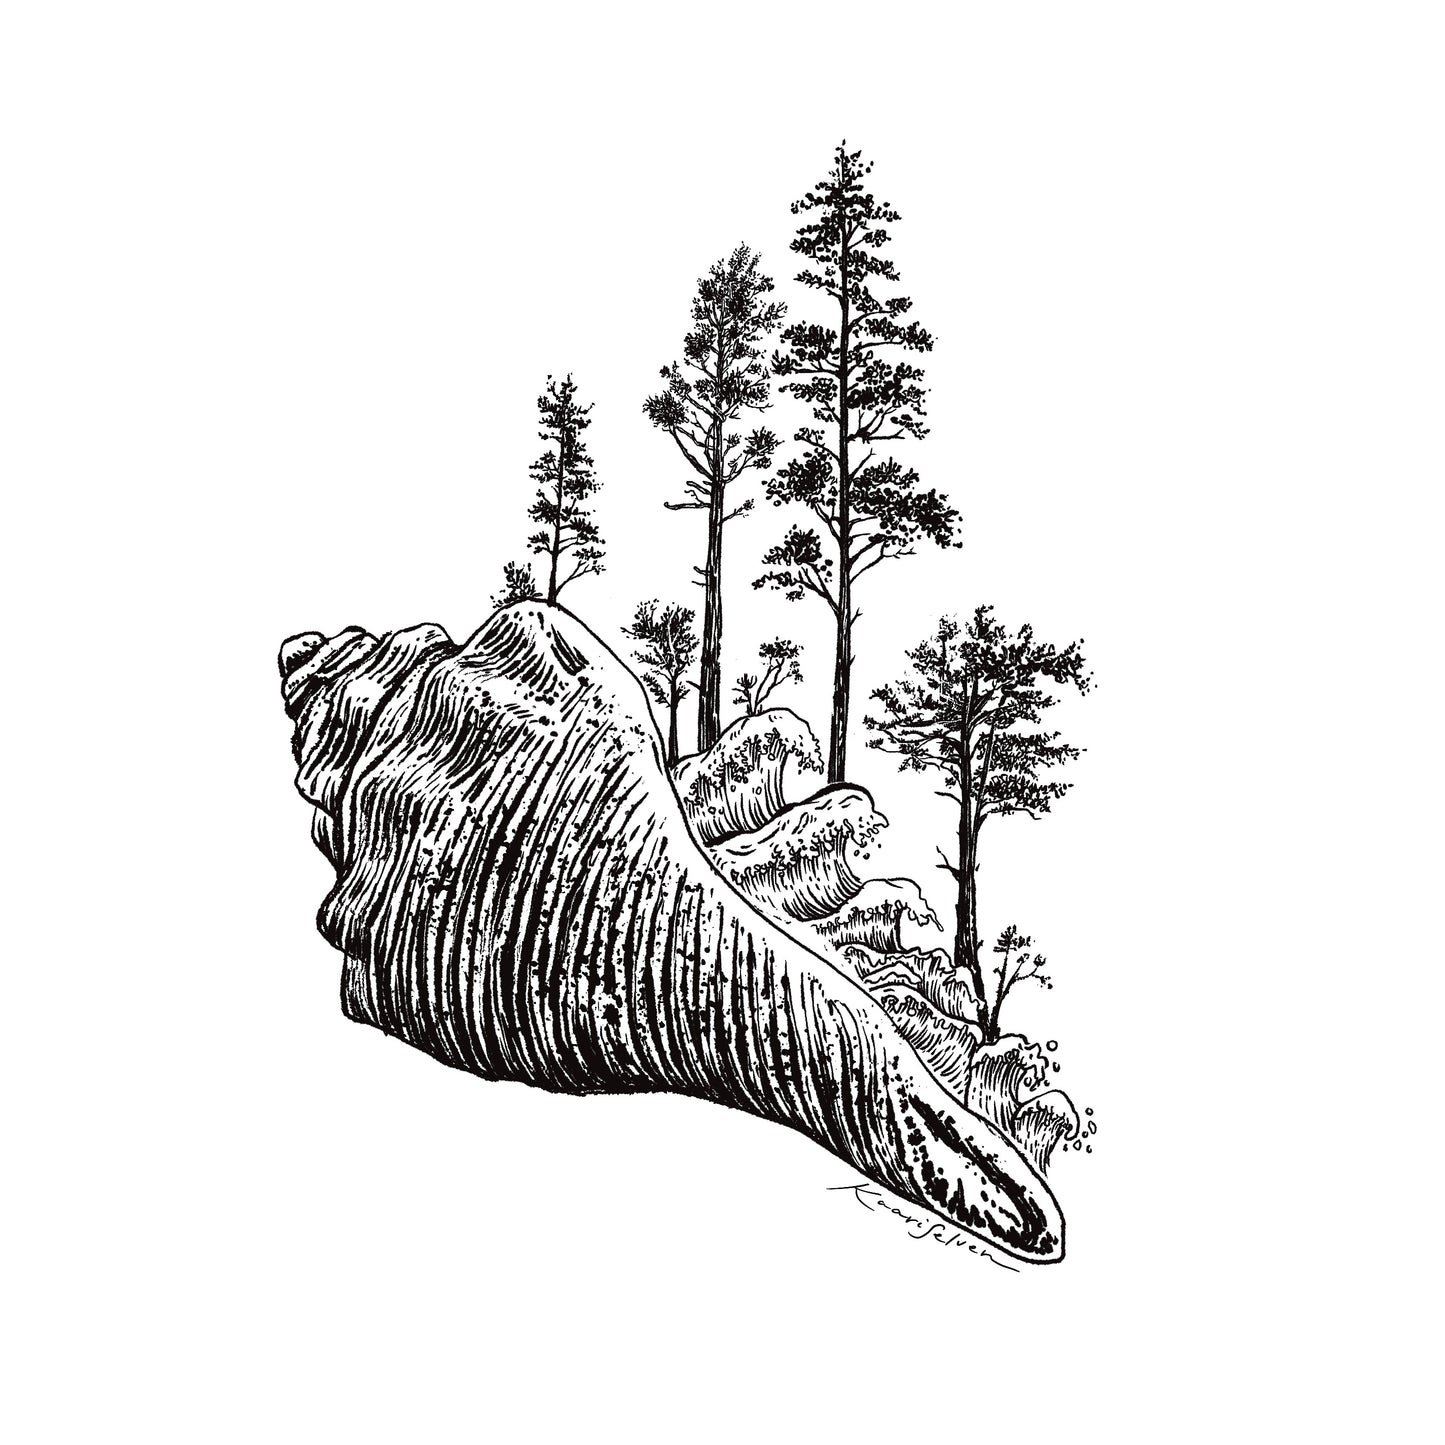 Forested Sitka Spruce Seashell Art Print